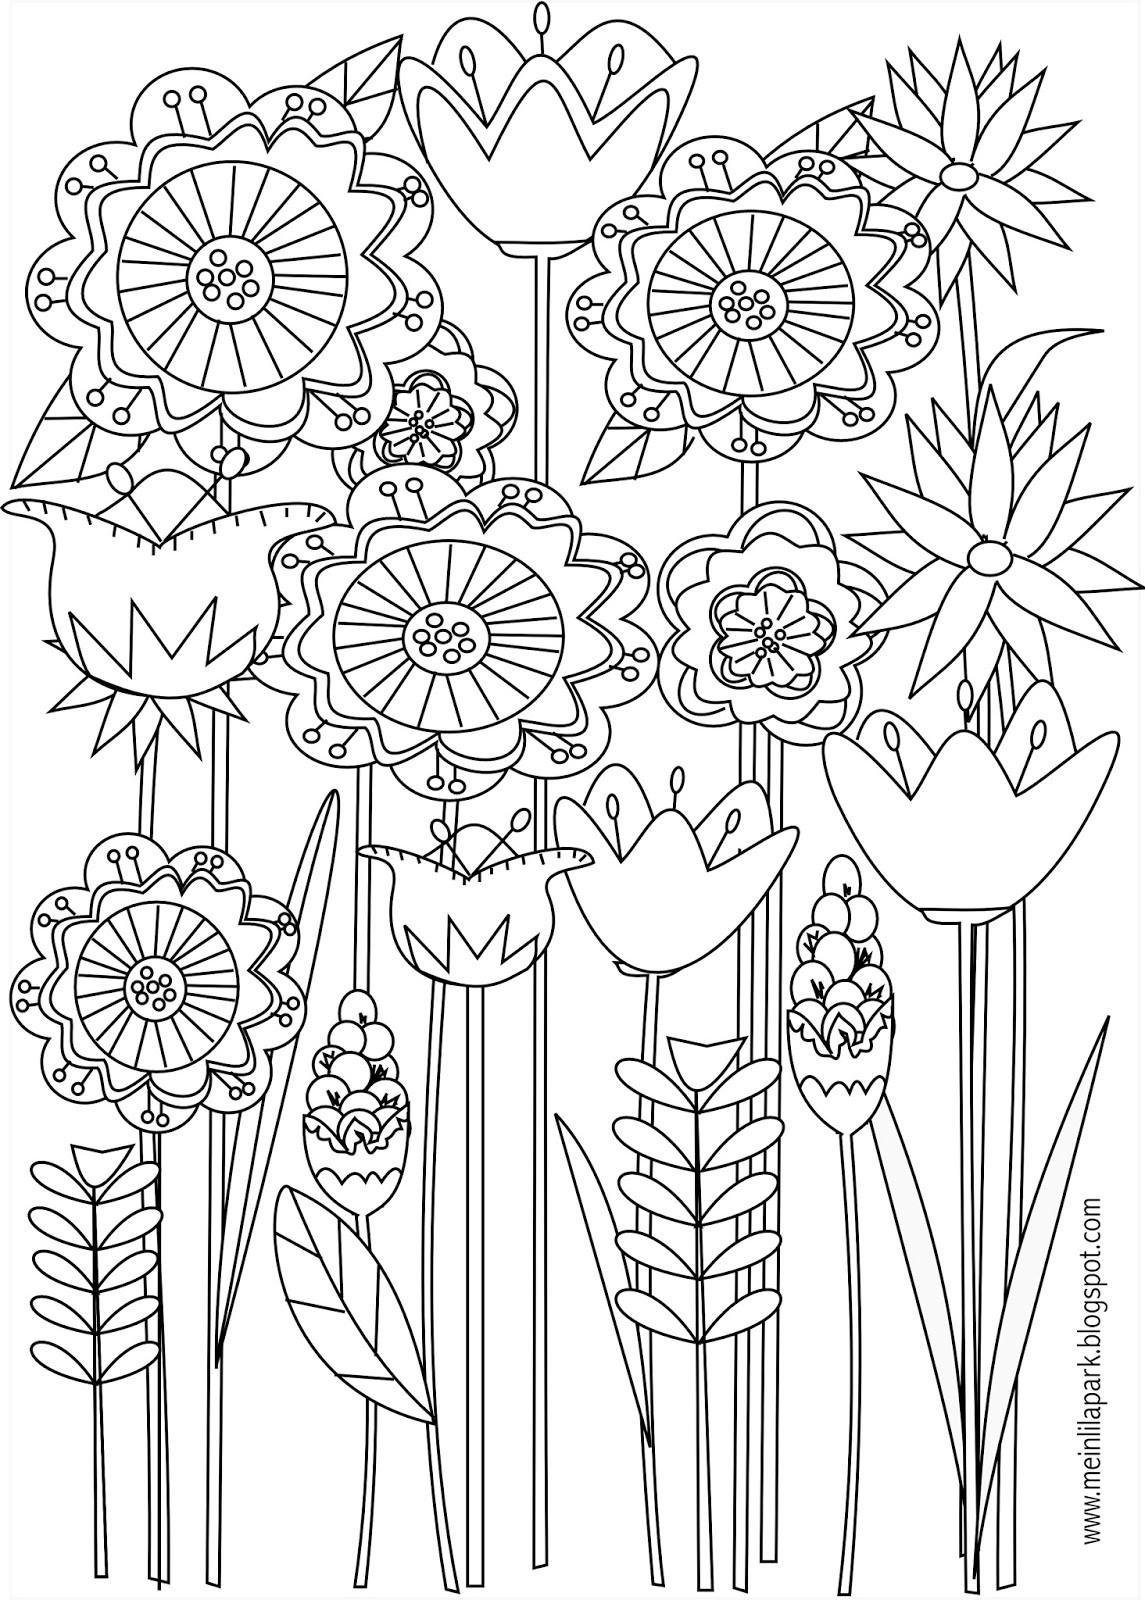 Free Printable Coloring Pages Of Flowers
 Free printable floral coloring page ausdruckbare